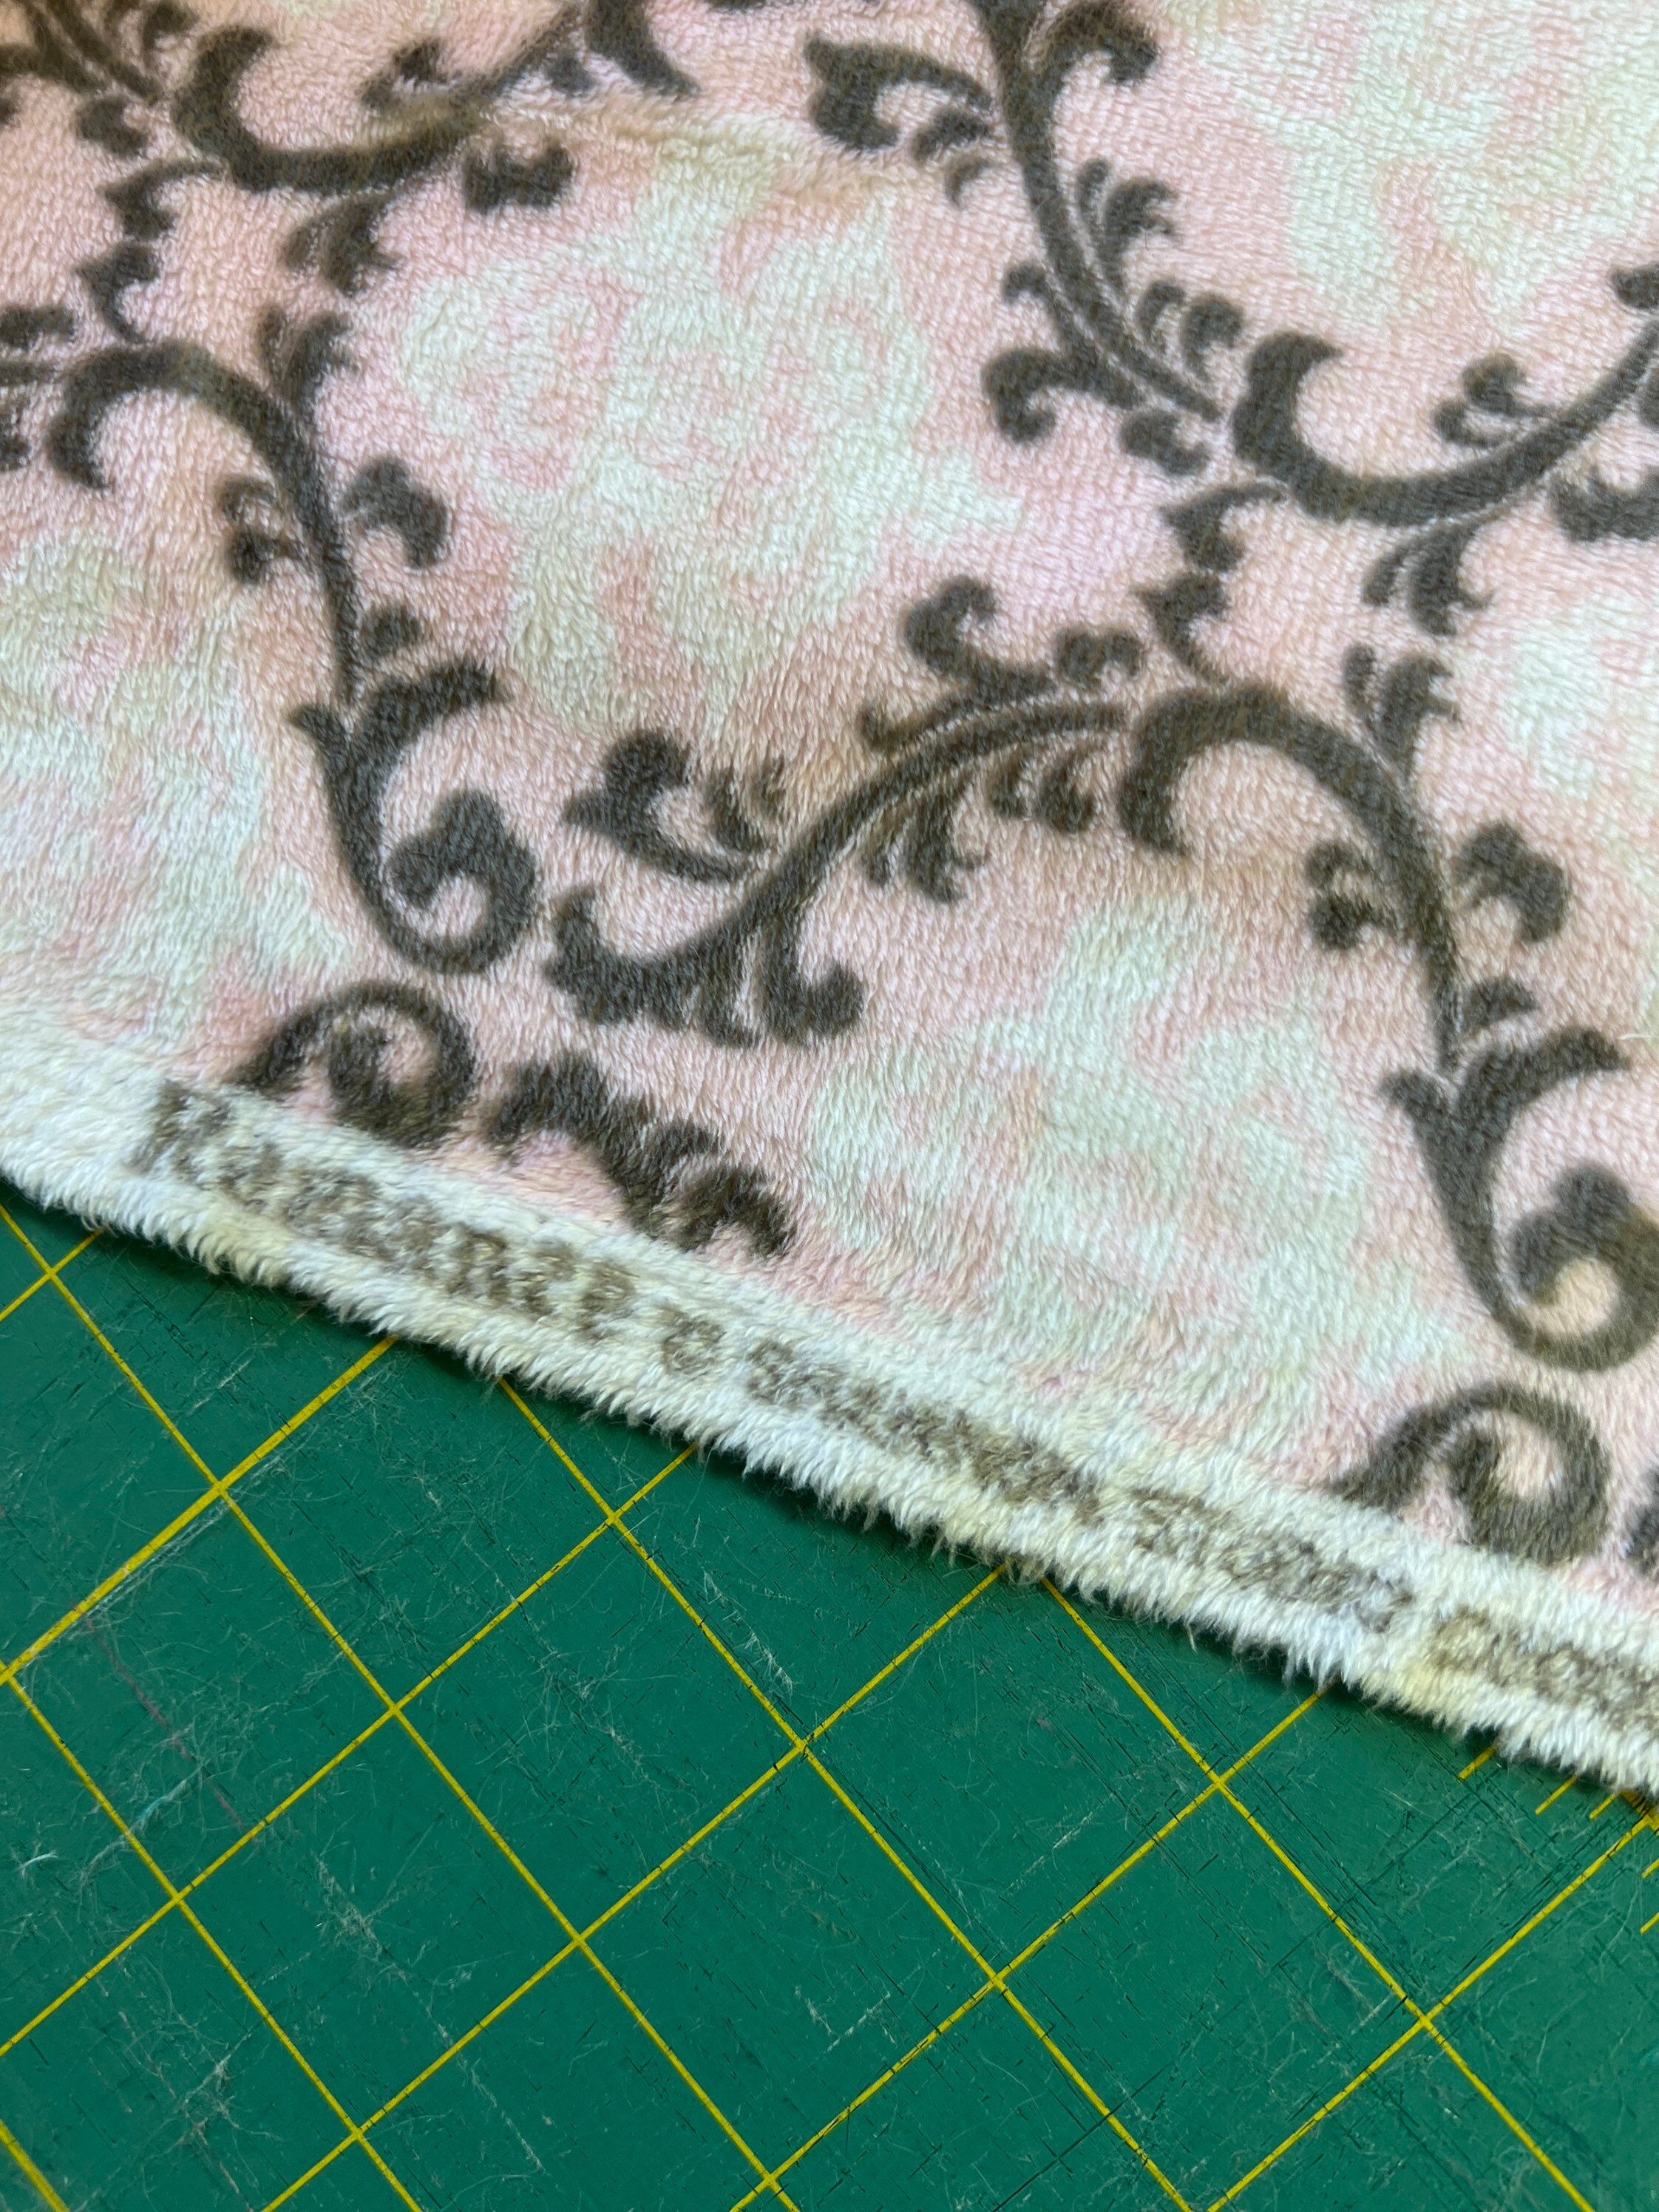 Clearance Sale Fabric Shannon Romance Vine Damask Minky Cuddle Snuggle Gray Grey Light Pink Sage Baby Blanket Baby Girl Sewing